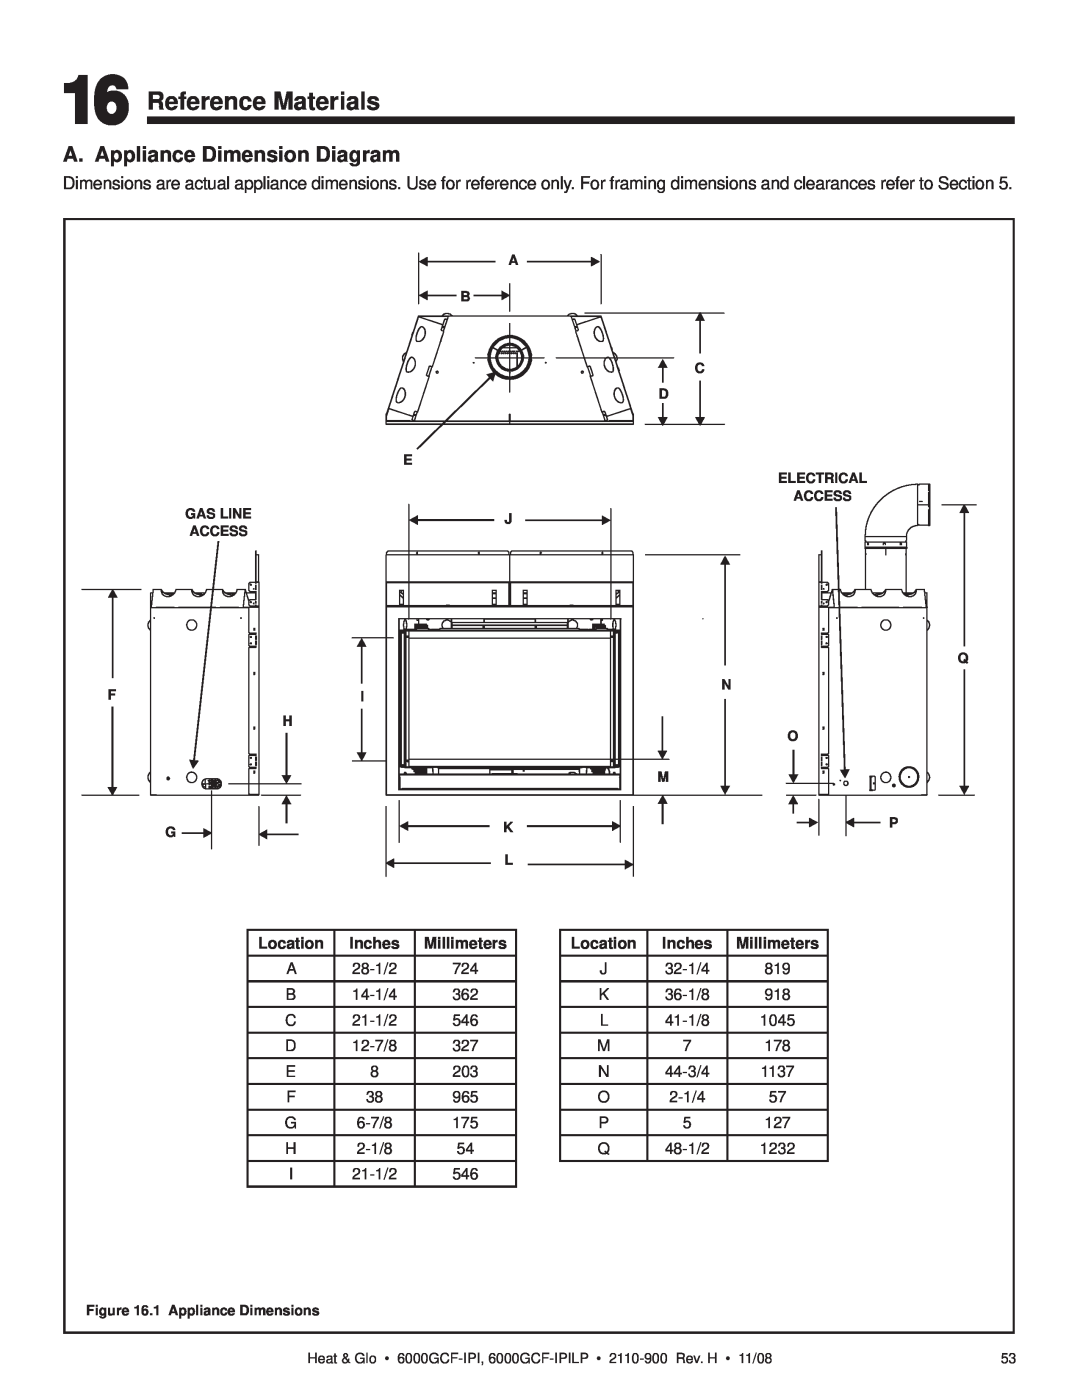 Hearth and Home Technologies 6000GCF-IPI Reference Materials, A. Appliance Dimension Diagram, Location, Inches, 6-7/8 